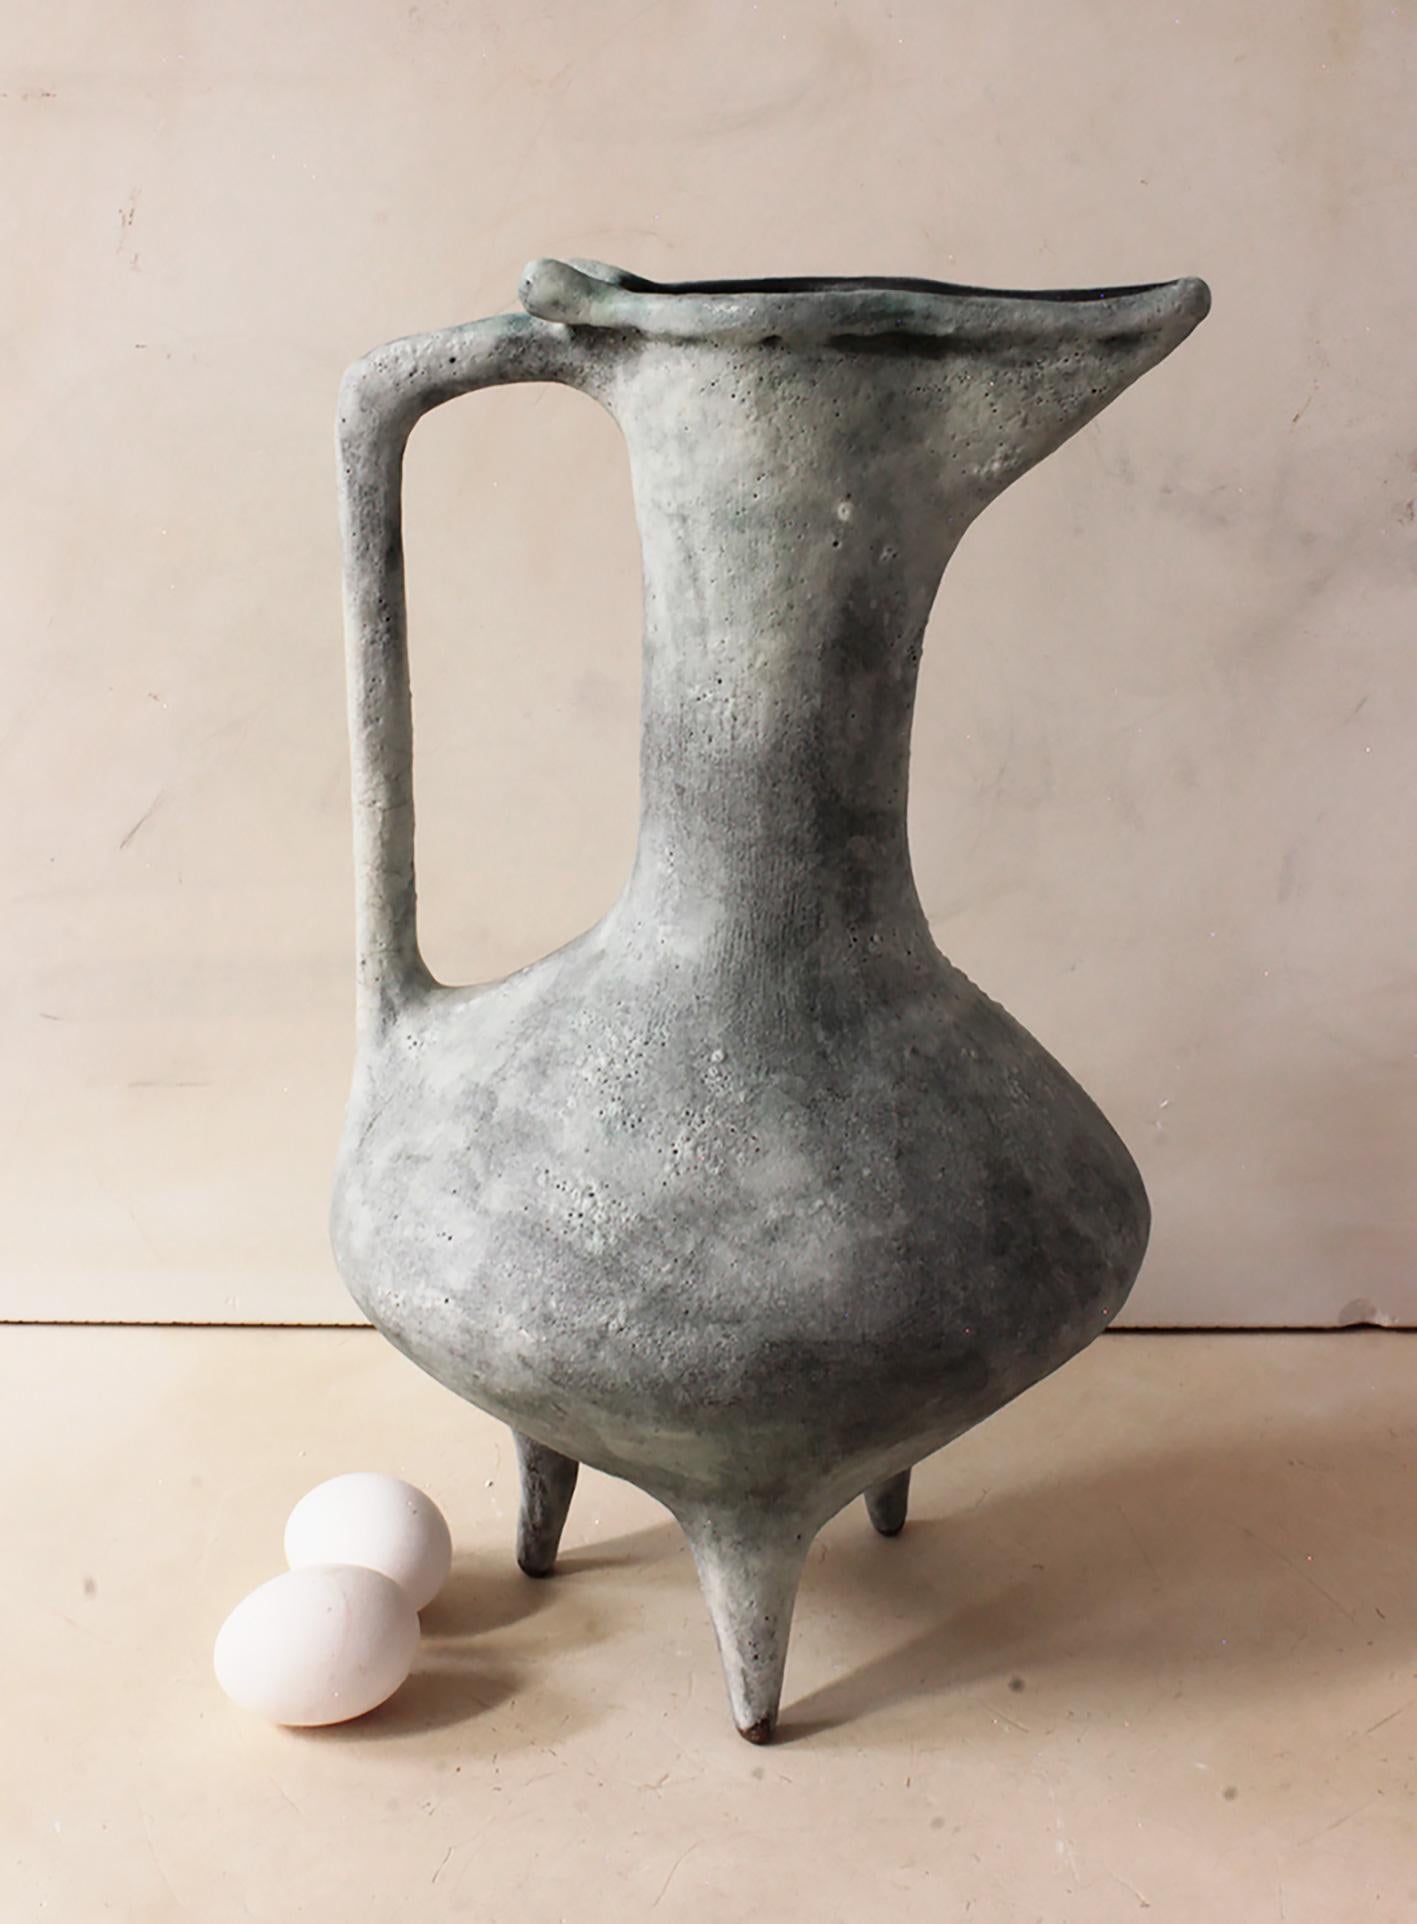 Goose Jar by Silvia Valentín
Signed
Materials: Stoneware, mineral glaze
Dimensions: Diameter 24 x height 42.5 cm
Weight: 3.121 kg

Graduated in Fine Arts in 1991. 
Restorer of wall paintings and archaeology.
Graduate of the Francisco